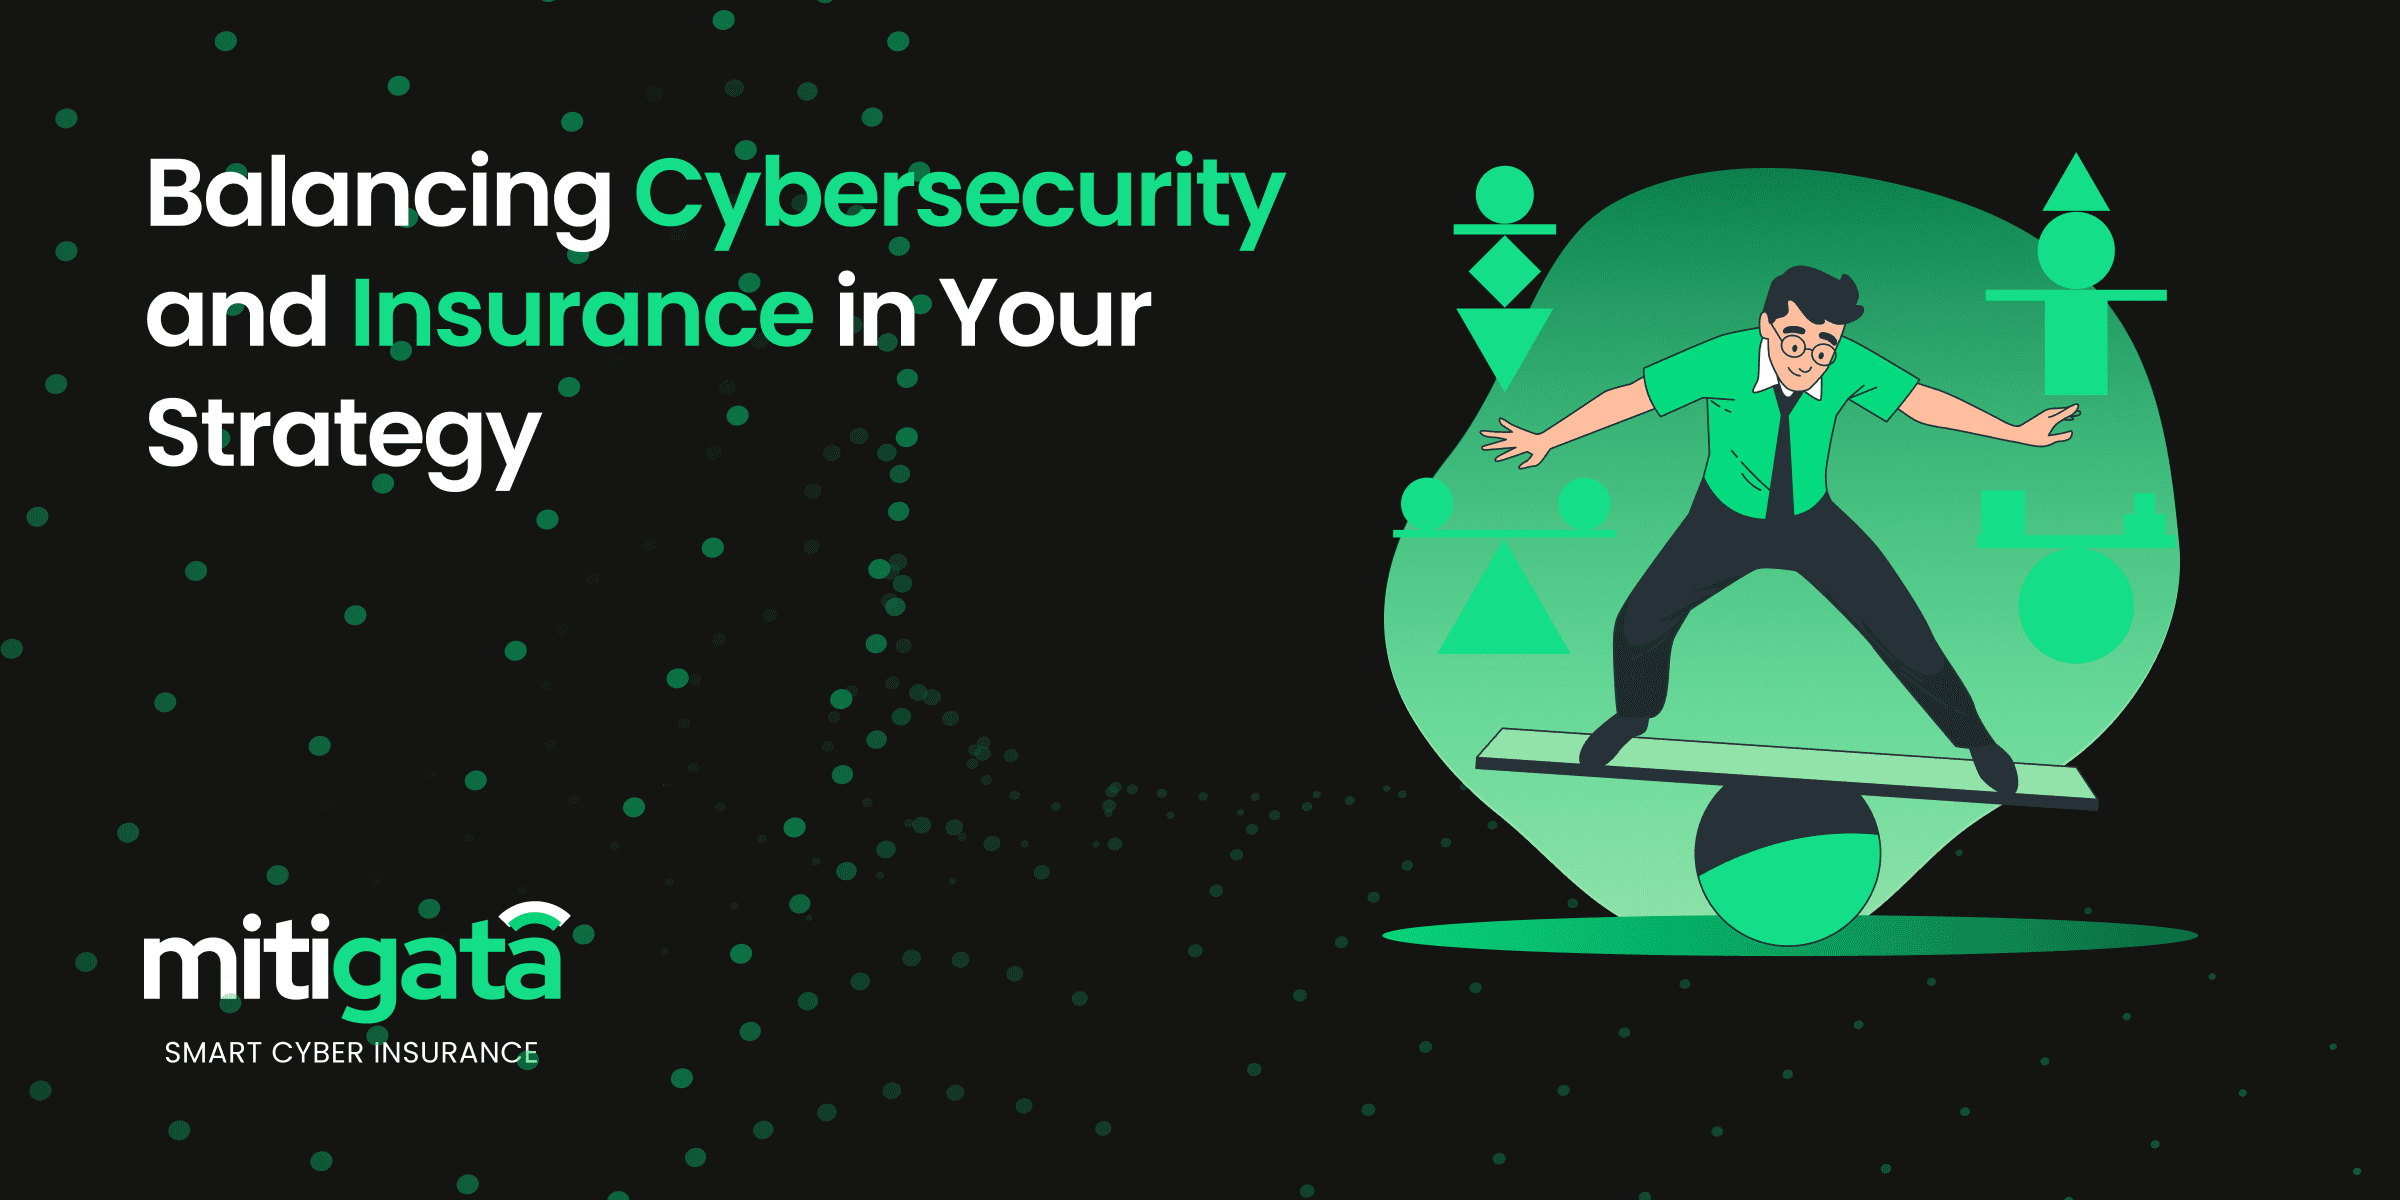 Graphic with a man balancing on a seesaw with cybersecurity and insurance elements, titled 'Balancing Cybersecurity and Insurance in Your Strategy' by mitigata